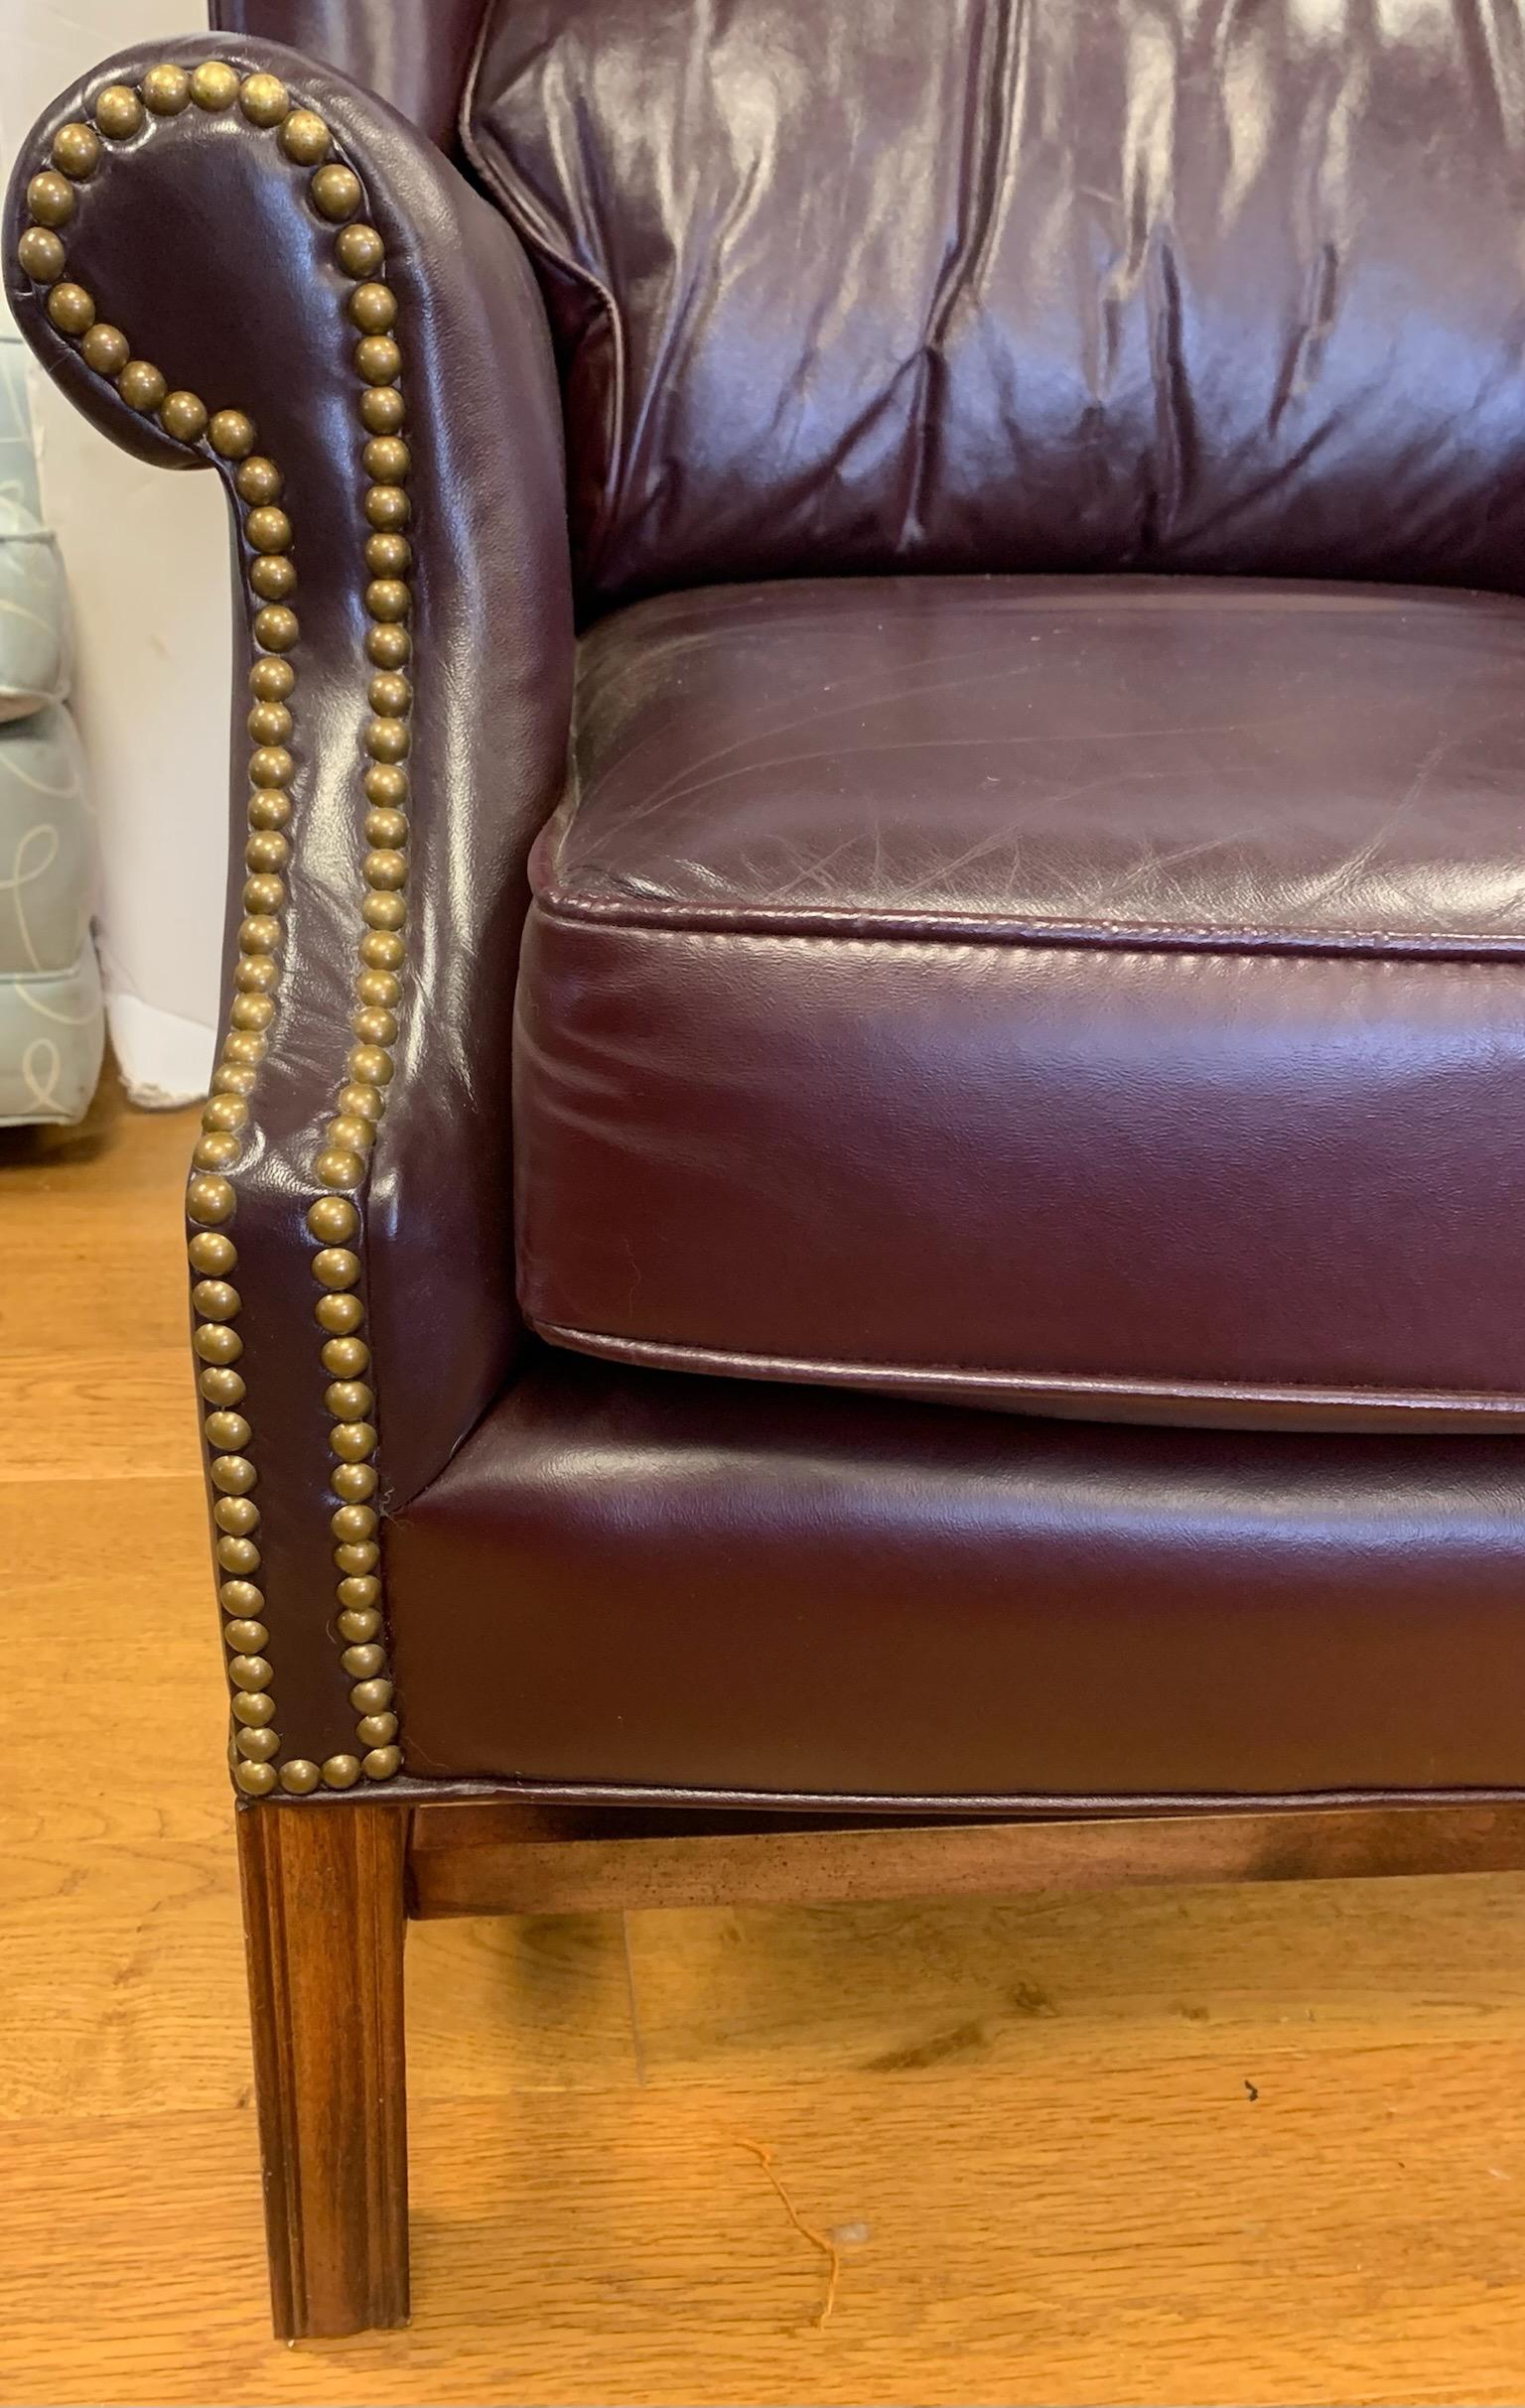 burgundy leather chair and ottoman